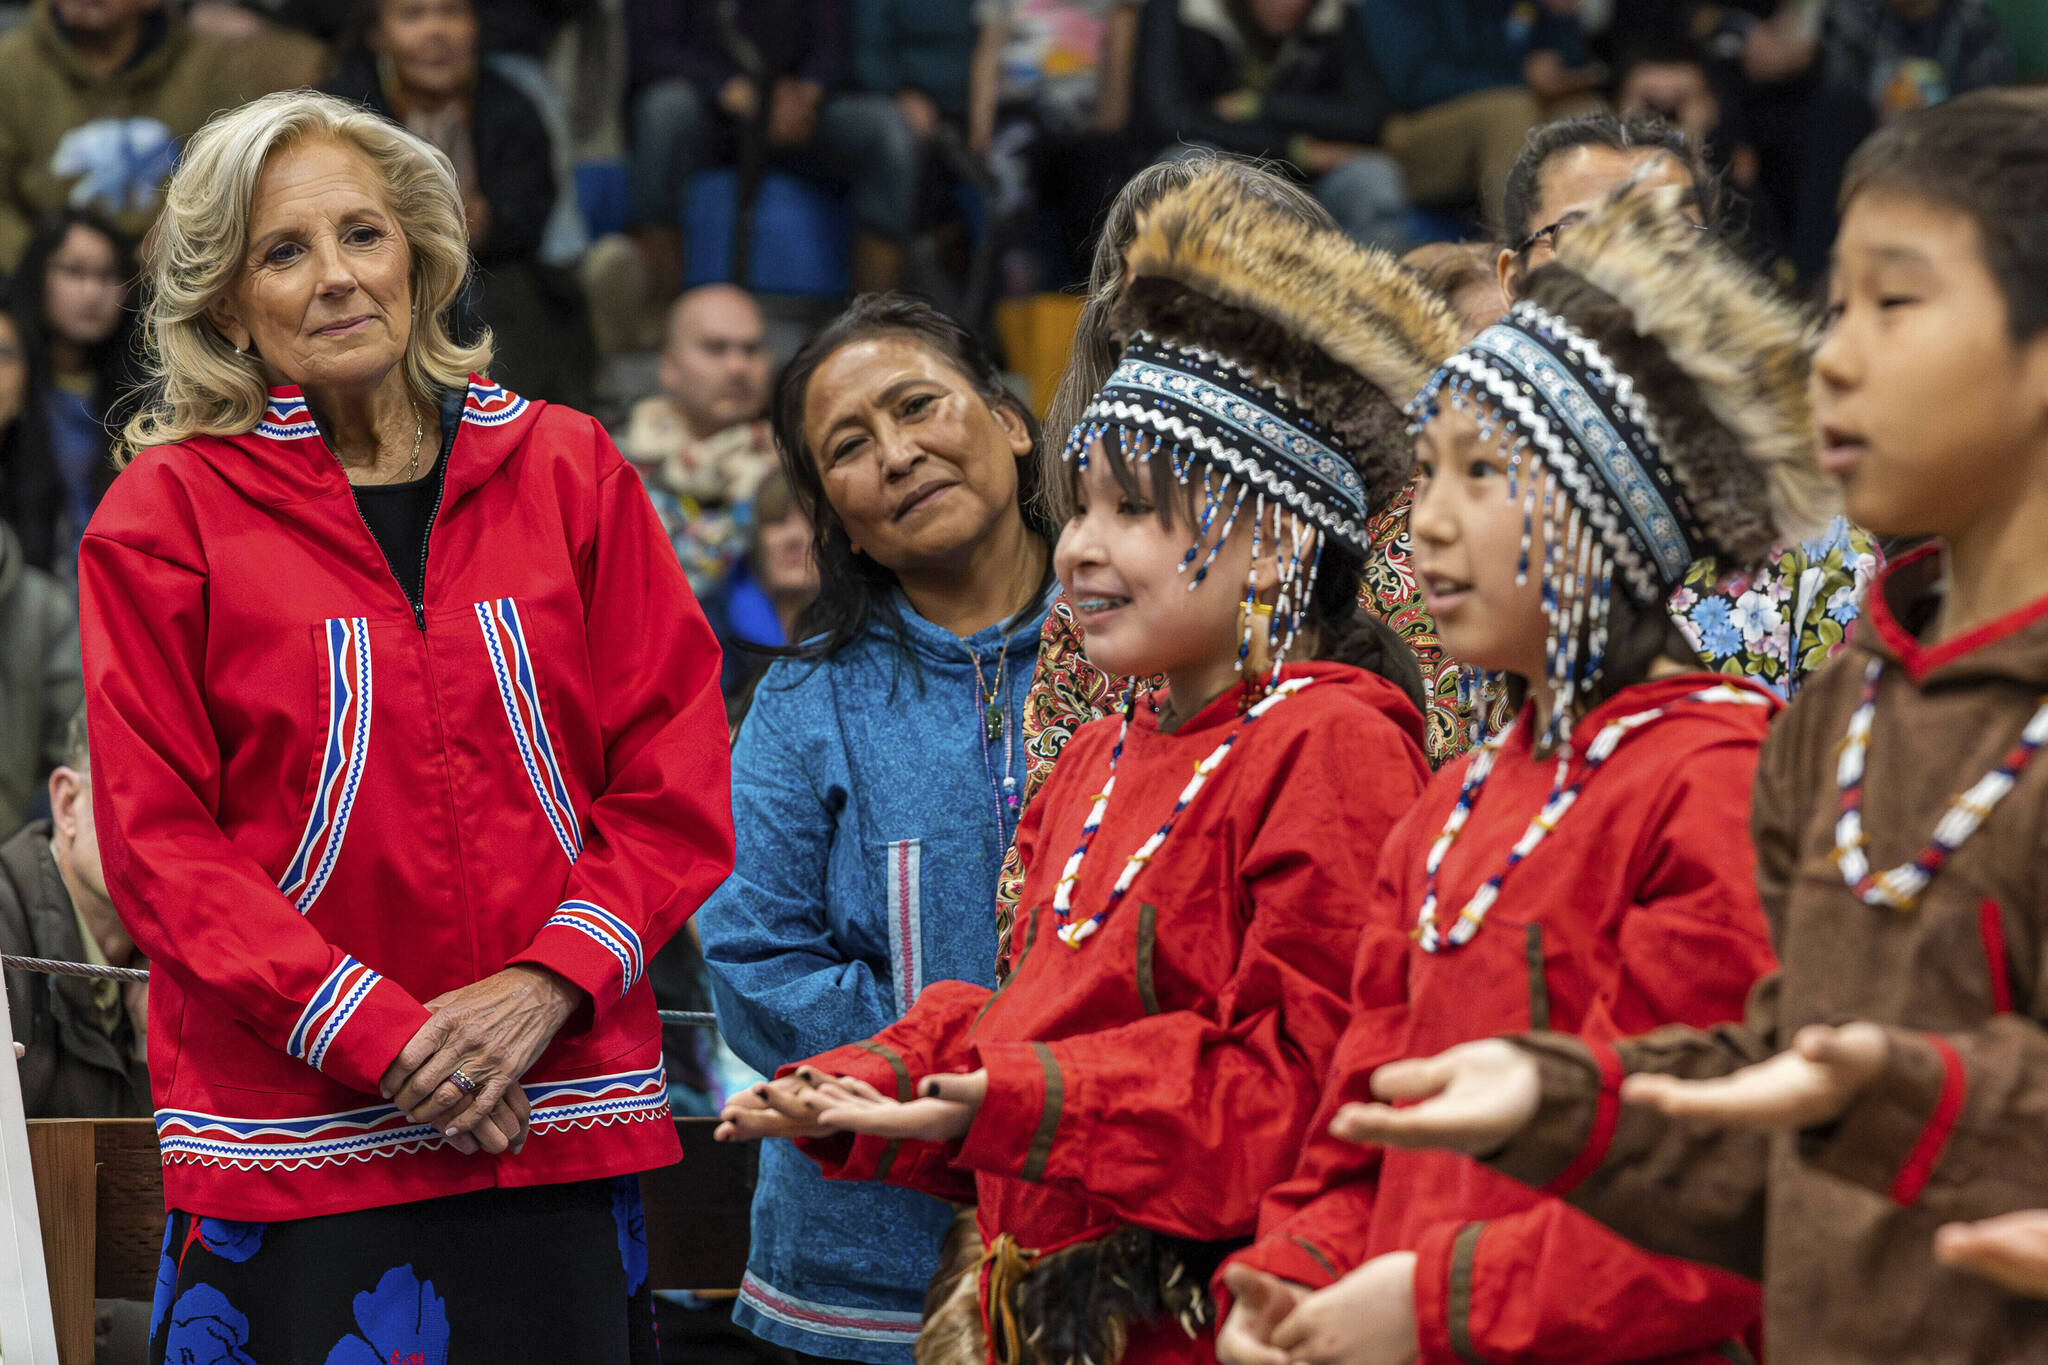 U.S. first lady Jill Biden, left, and first lady of Alaska Rose Dunleavy watch a performance by Ayaprun Elitnaurvik students during an event at Bethel Regional High School in Bethel, Alaska on Wednesday, May 17, 2023. Ayaprun Elitnaurvik is a Yugtun immersion school in Bethel. Biden and Interior Secretary Deb Haaland traveled to Bethel to highlight the Biden-Harris administration’s investments to expand broadband internet connectivity in Native American communities, including Alaska’s Yukon-Kuskokwim Delta. (Loren Holmes/Anchorage Daily News via AP)